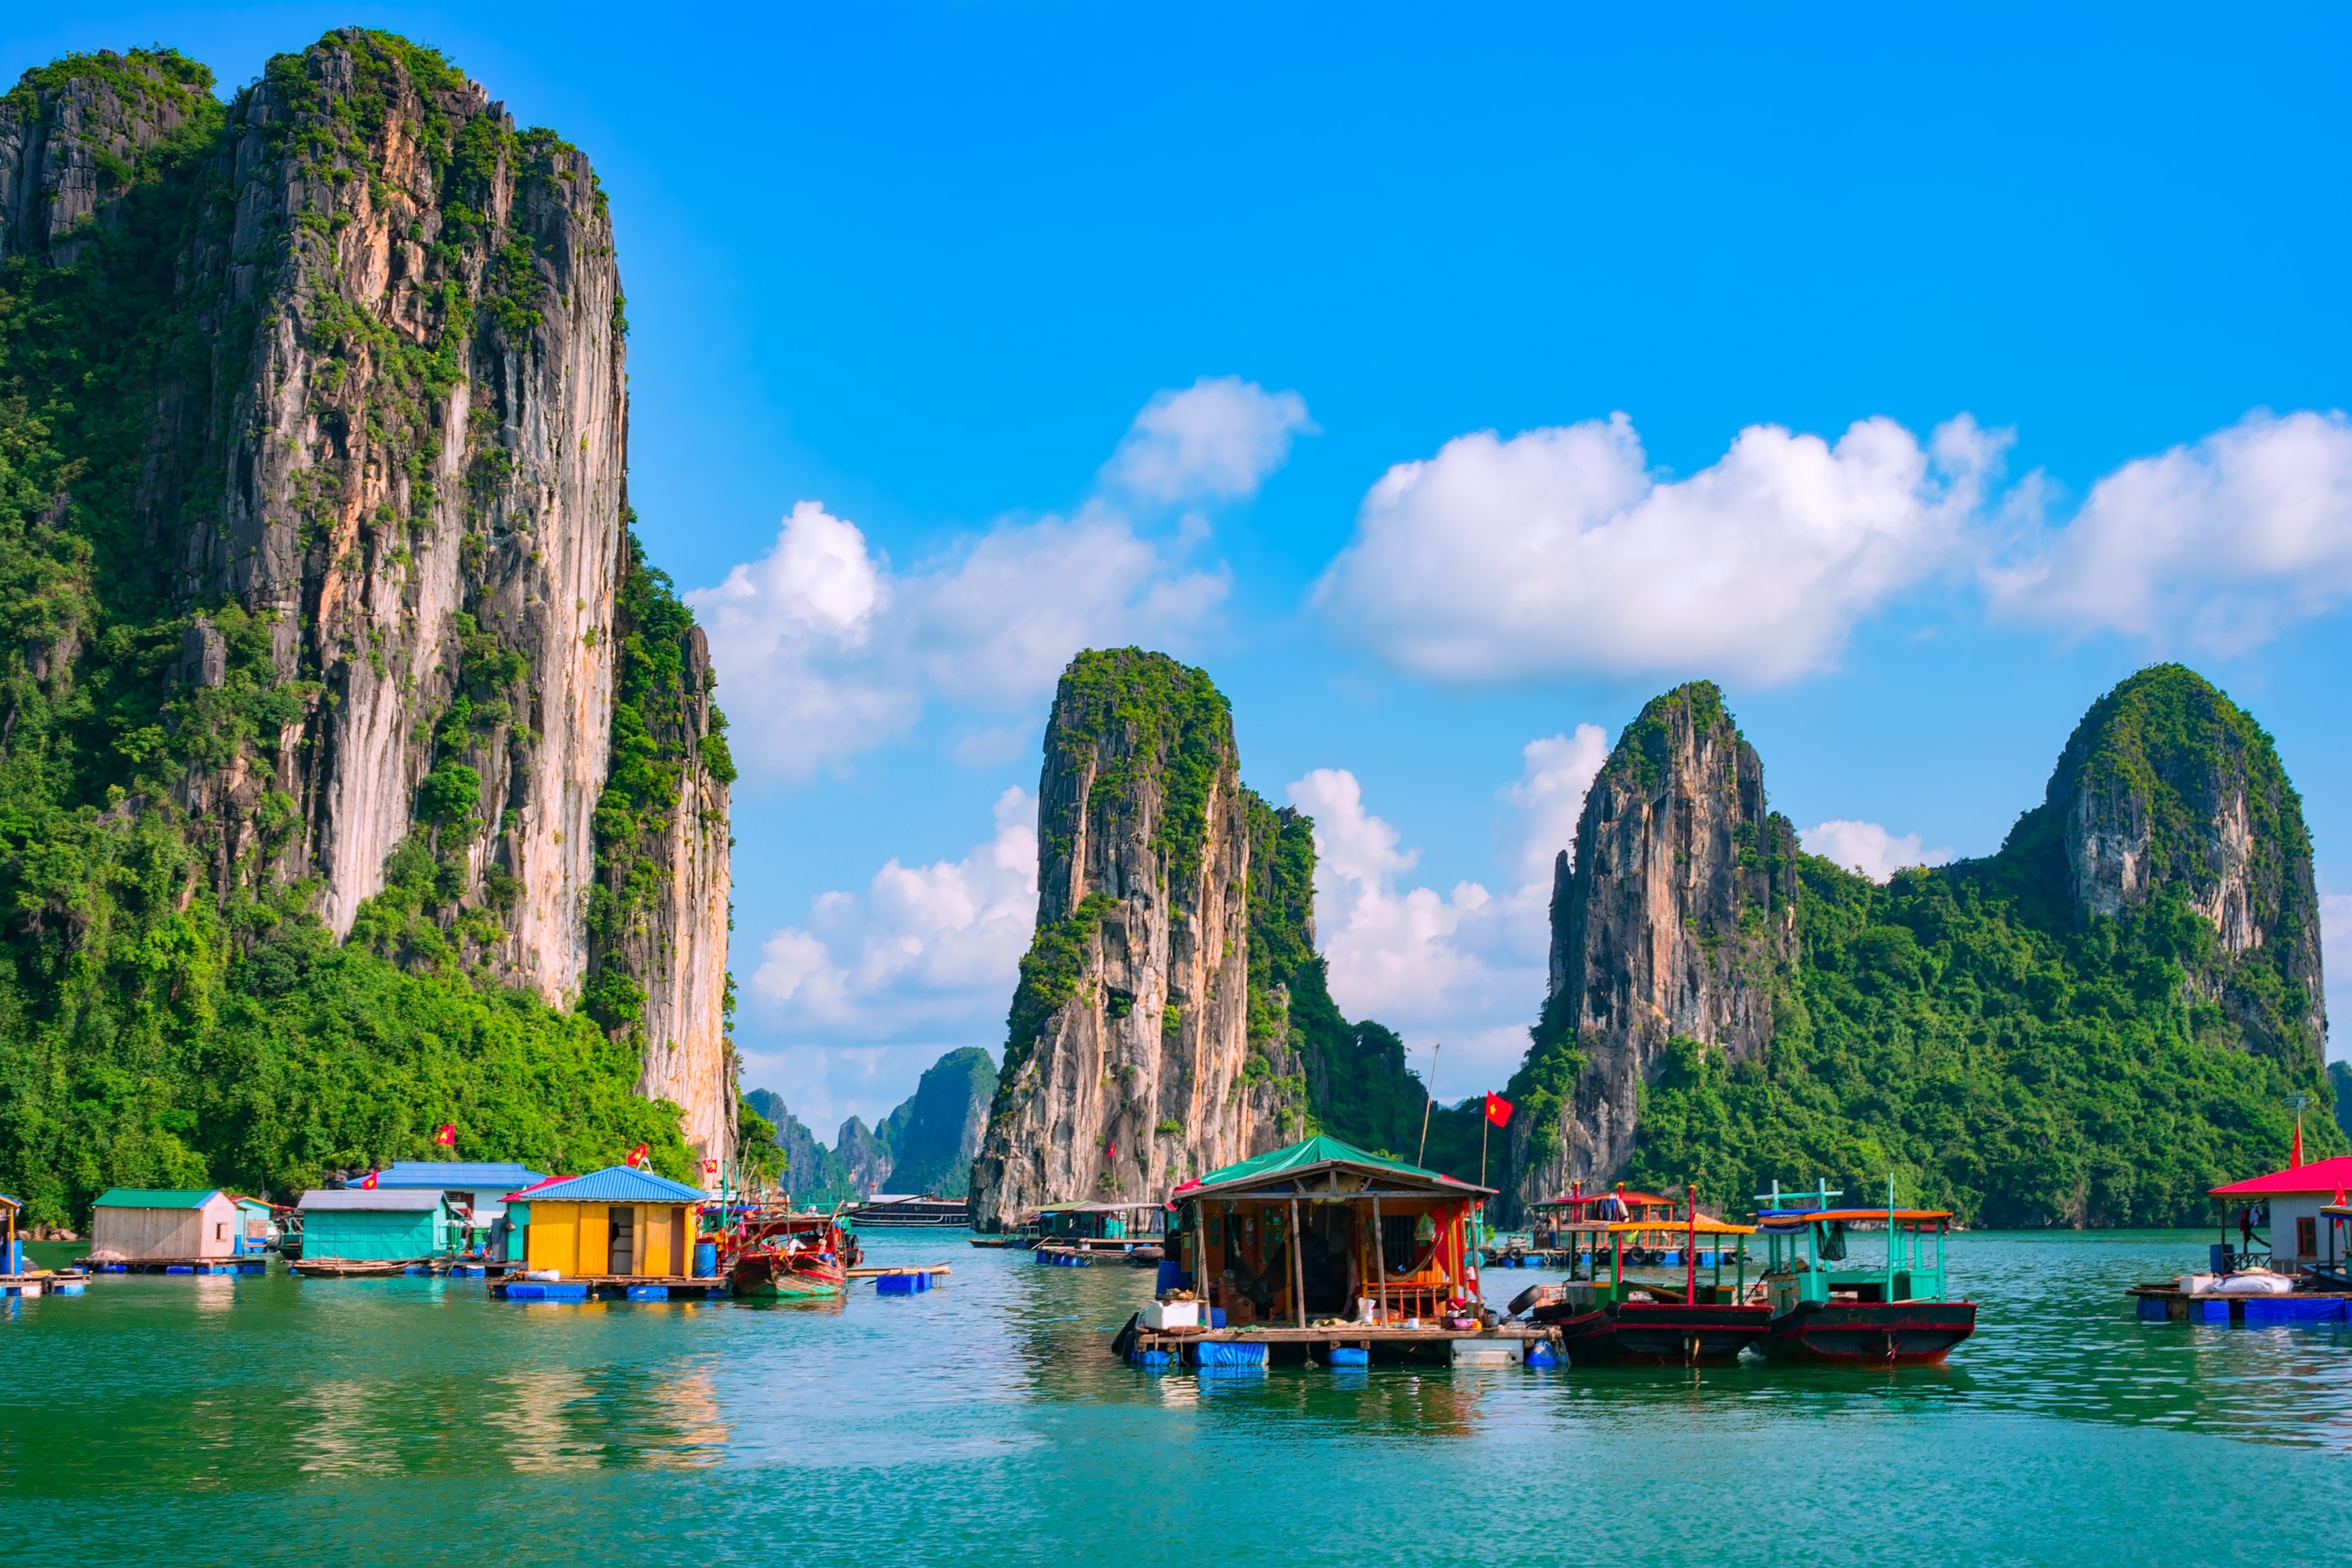 Plan your dream getaway to breathtaking Halong Bay, Vietnam and stay in our handpicked hotels that offer stunning views and exceptional service